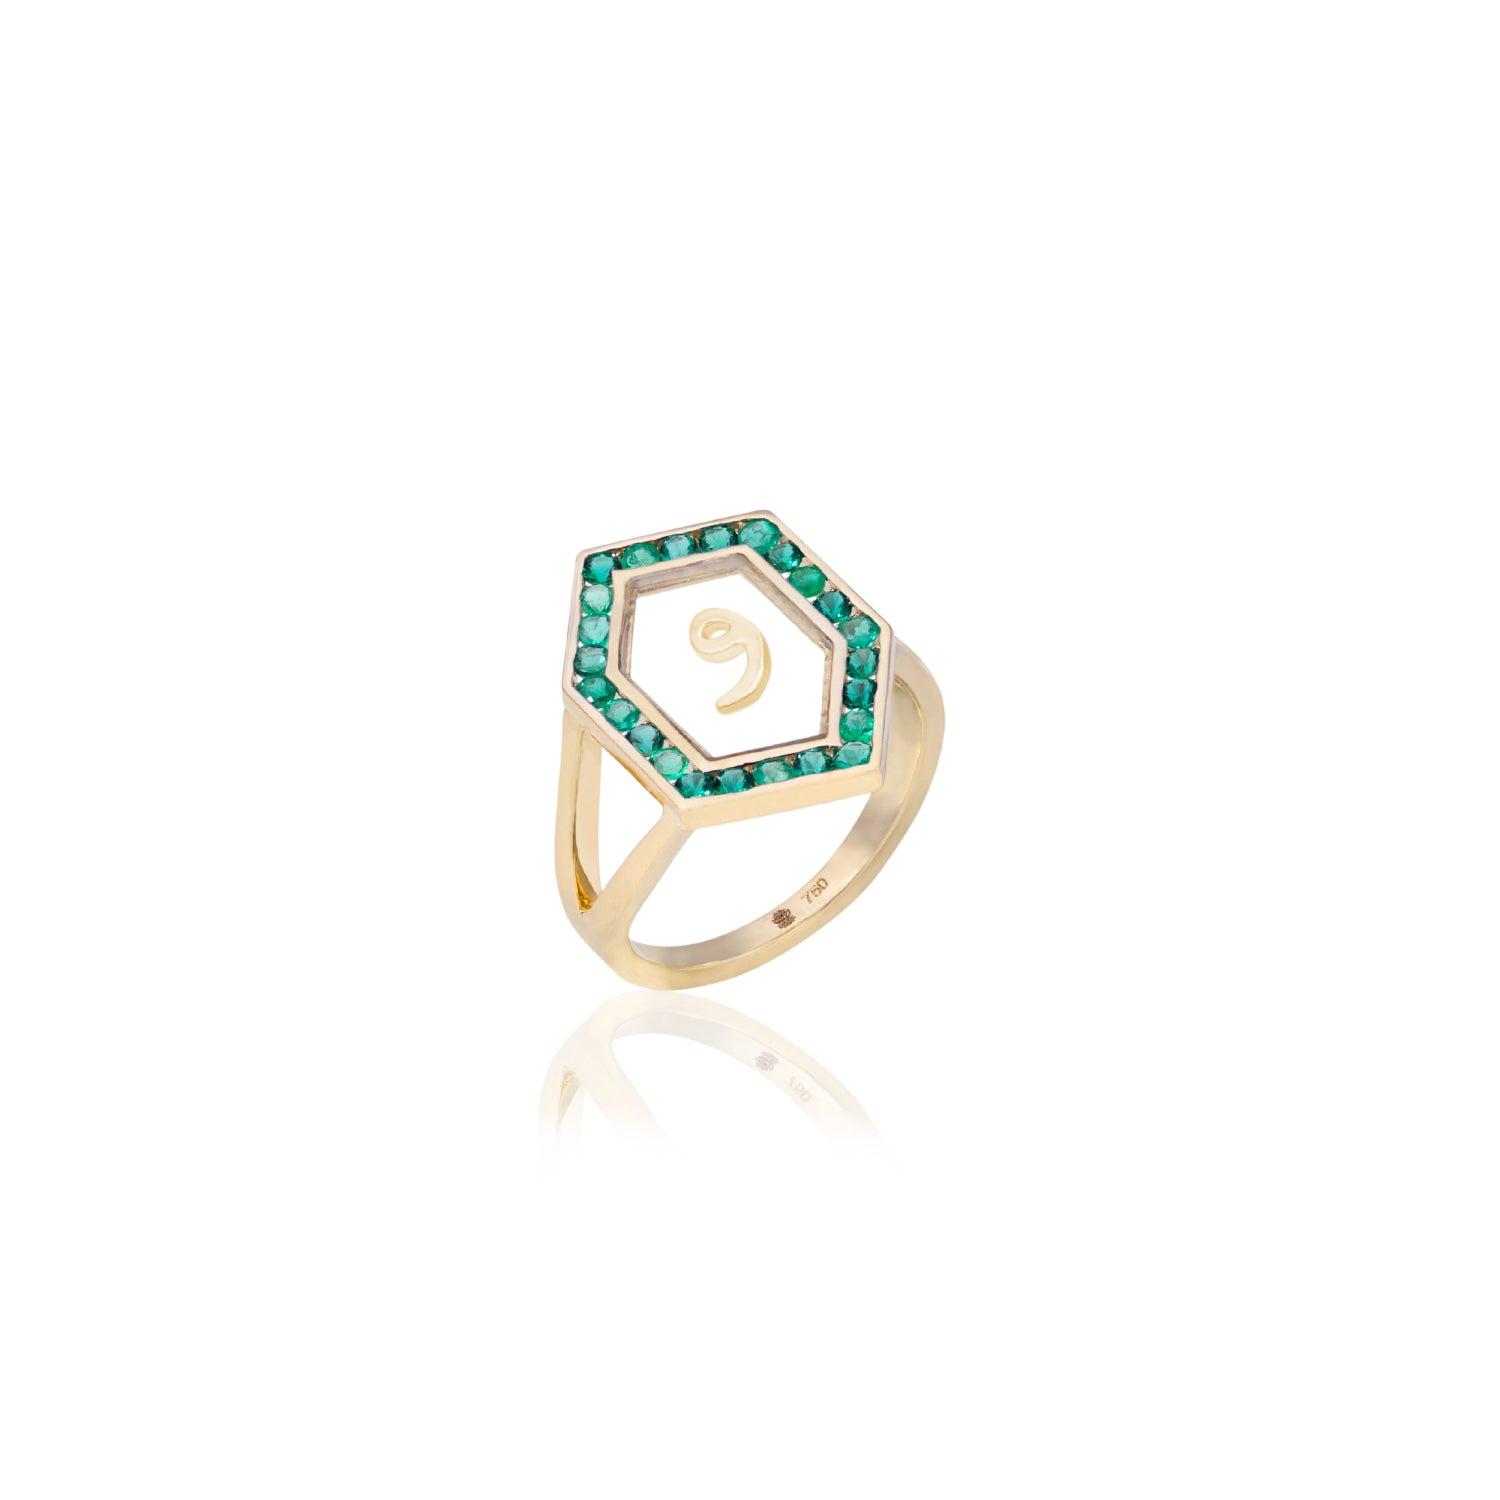 Qamoos 1.0 Letter و Emerald Ring in Yellow Gold